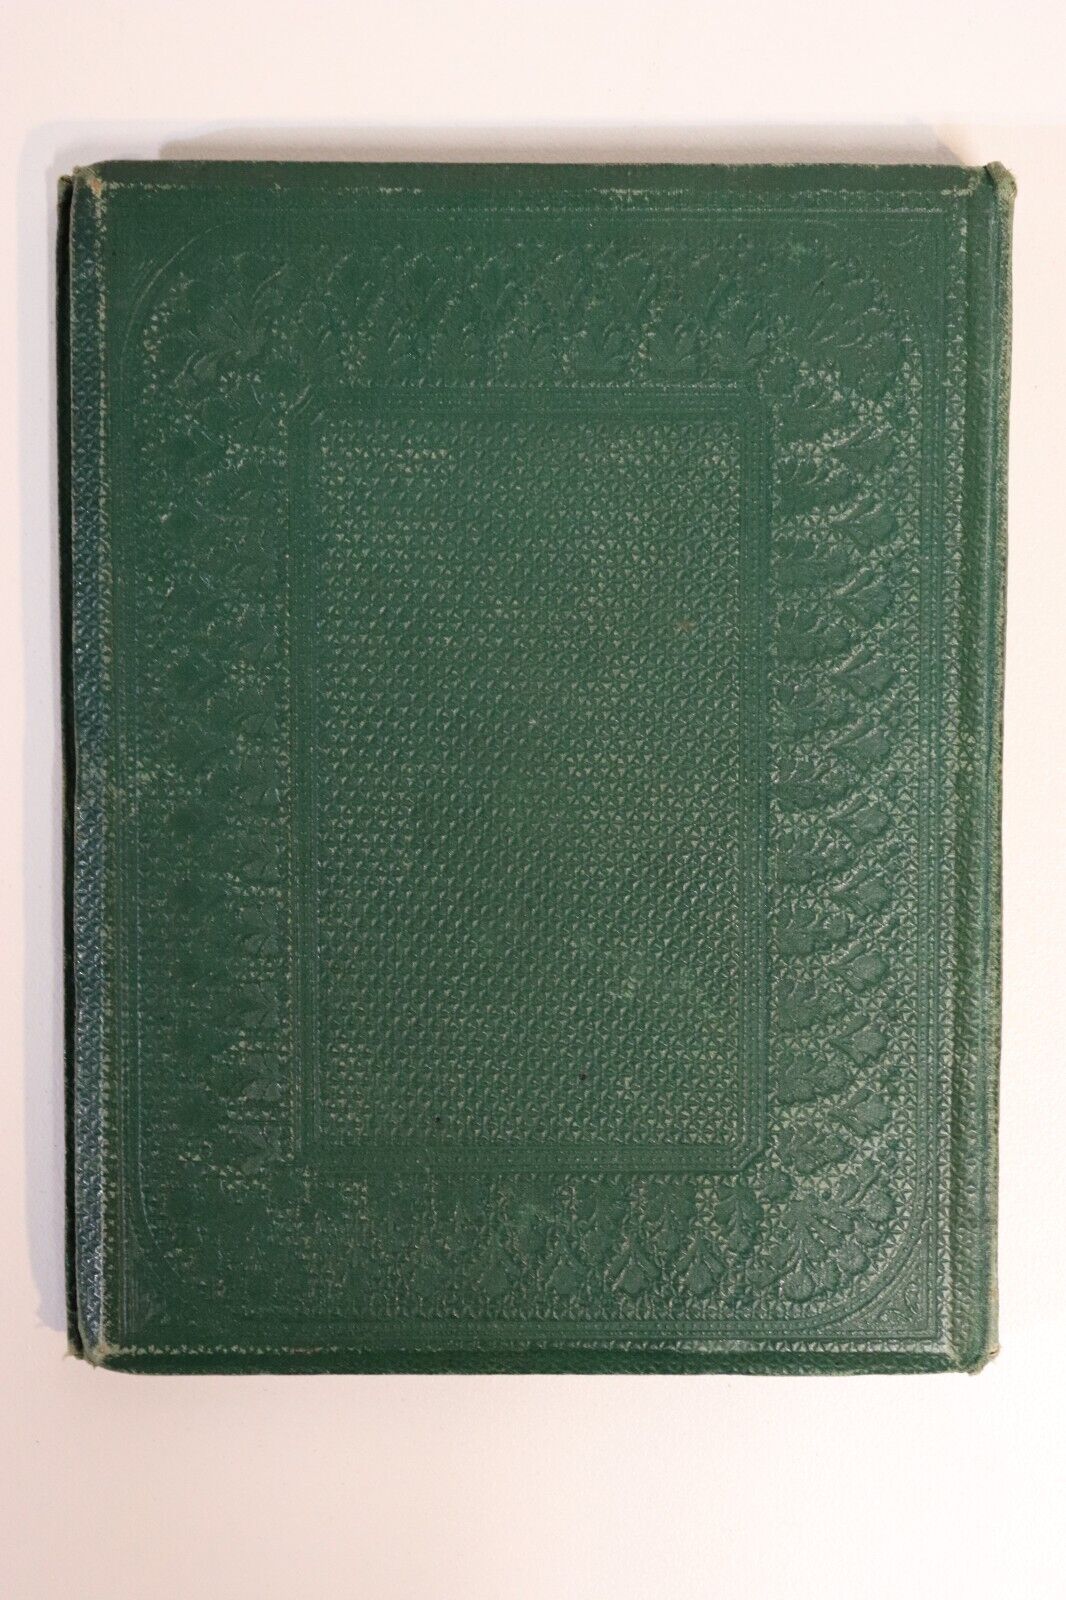 Wordsworth's Poems For The Young - 1863 - Antique Poetry Book